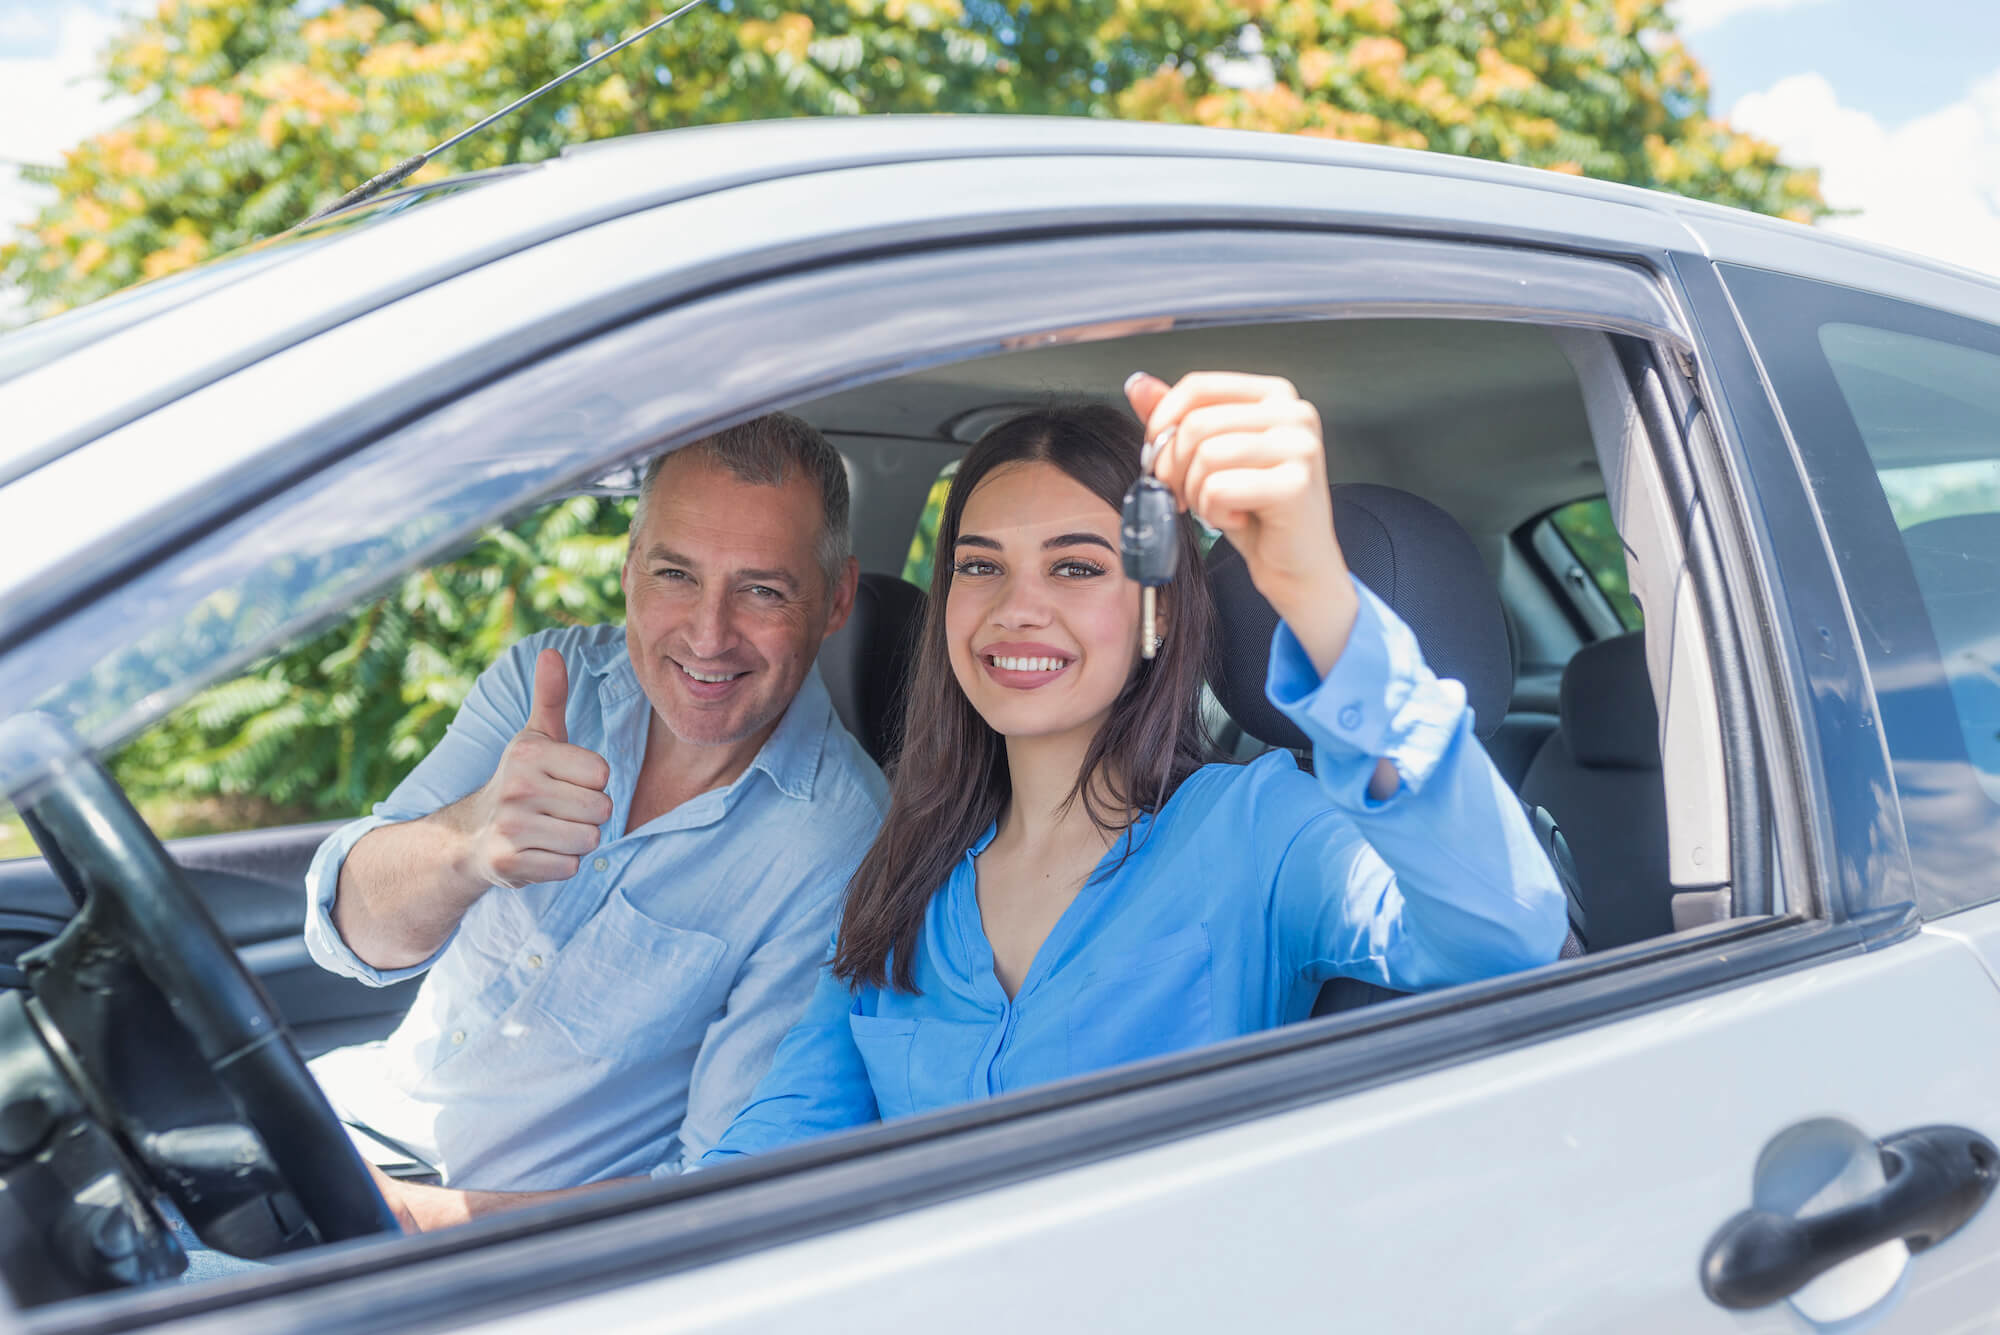 A driver's education instructor and student sitting in a car as the student holds up her keys to show she's ready to start driving. Workforce Essentials offers driver's education classes for adults and minors.